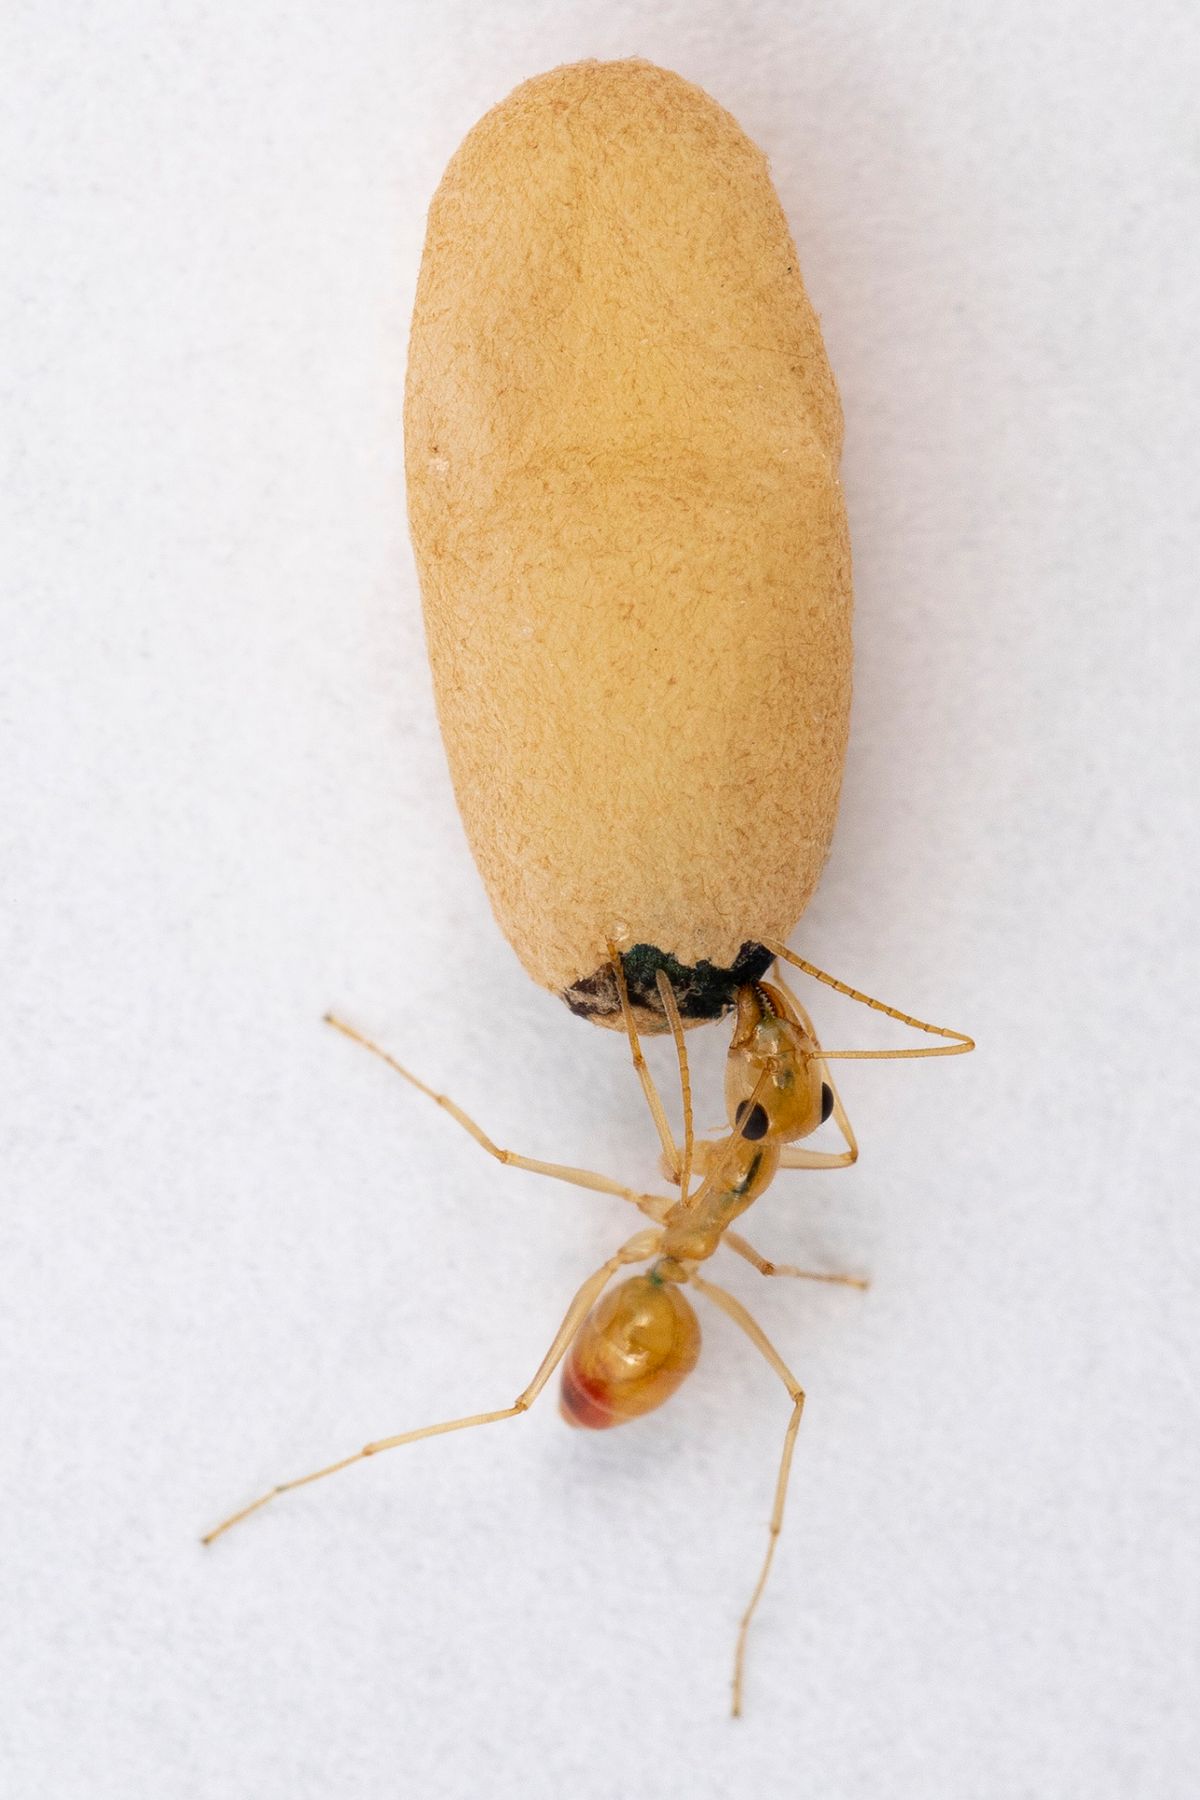 An orange-brown ant reaches its front legs and head into a hole at the bottom of a large orange cocoon.